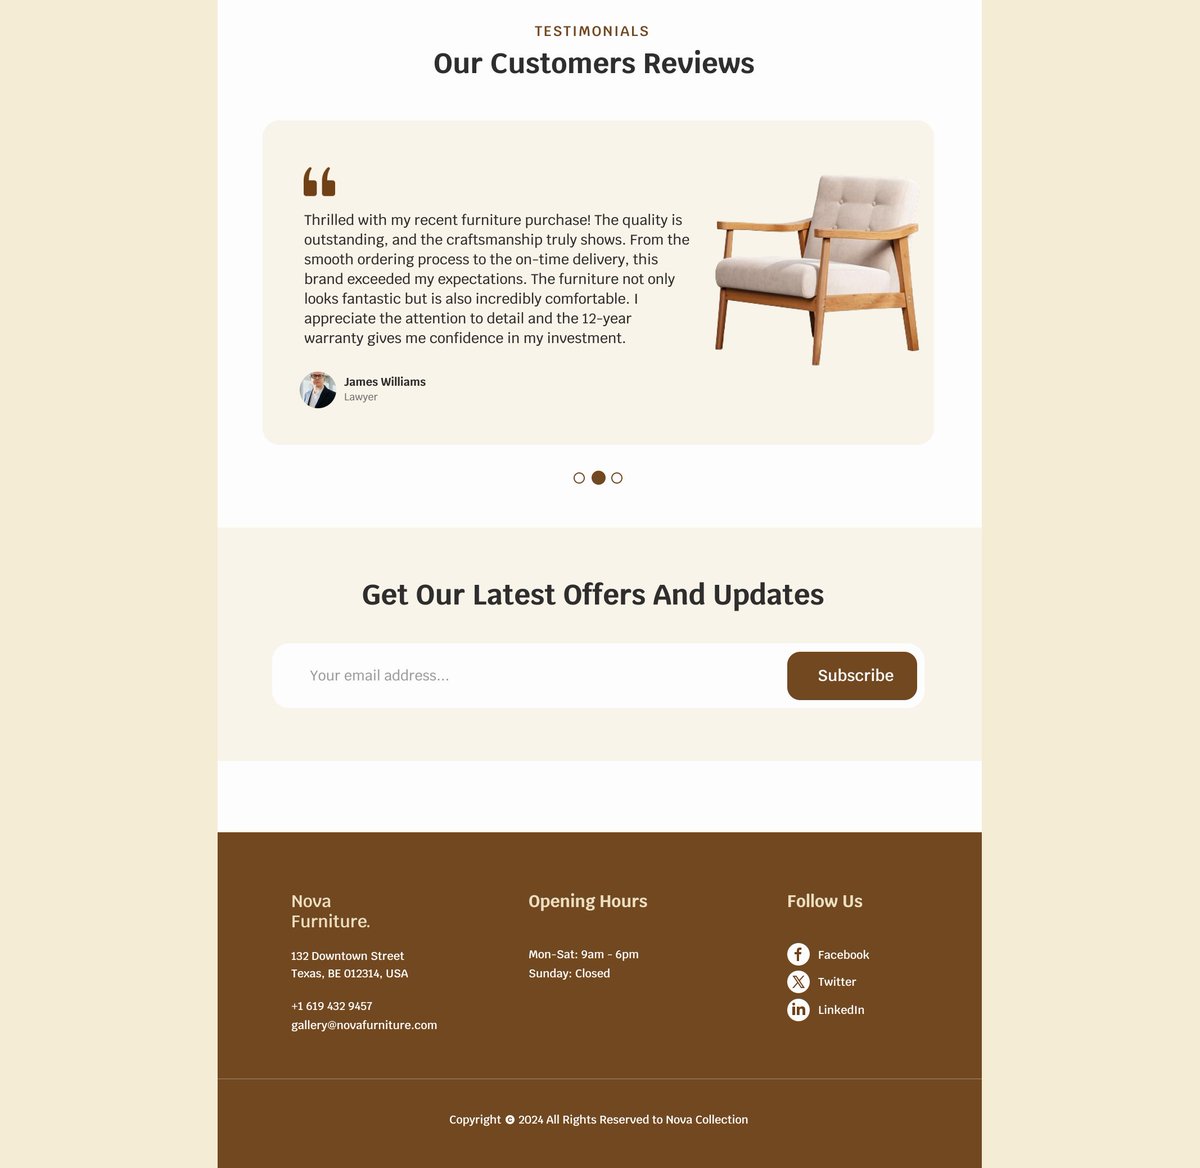 Another project done ✅

I designed a fictional landing page for a furniture brand 

Check out the full project on my Behance -->> shorturl.at/gvDOZ

Let me know what you think 🤔

#uidesign #uiuxdesign #daretoshare24 #figma #productdesign #furniture #furniturebrand